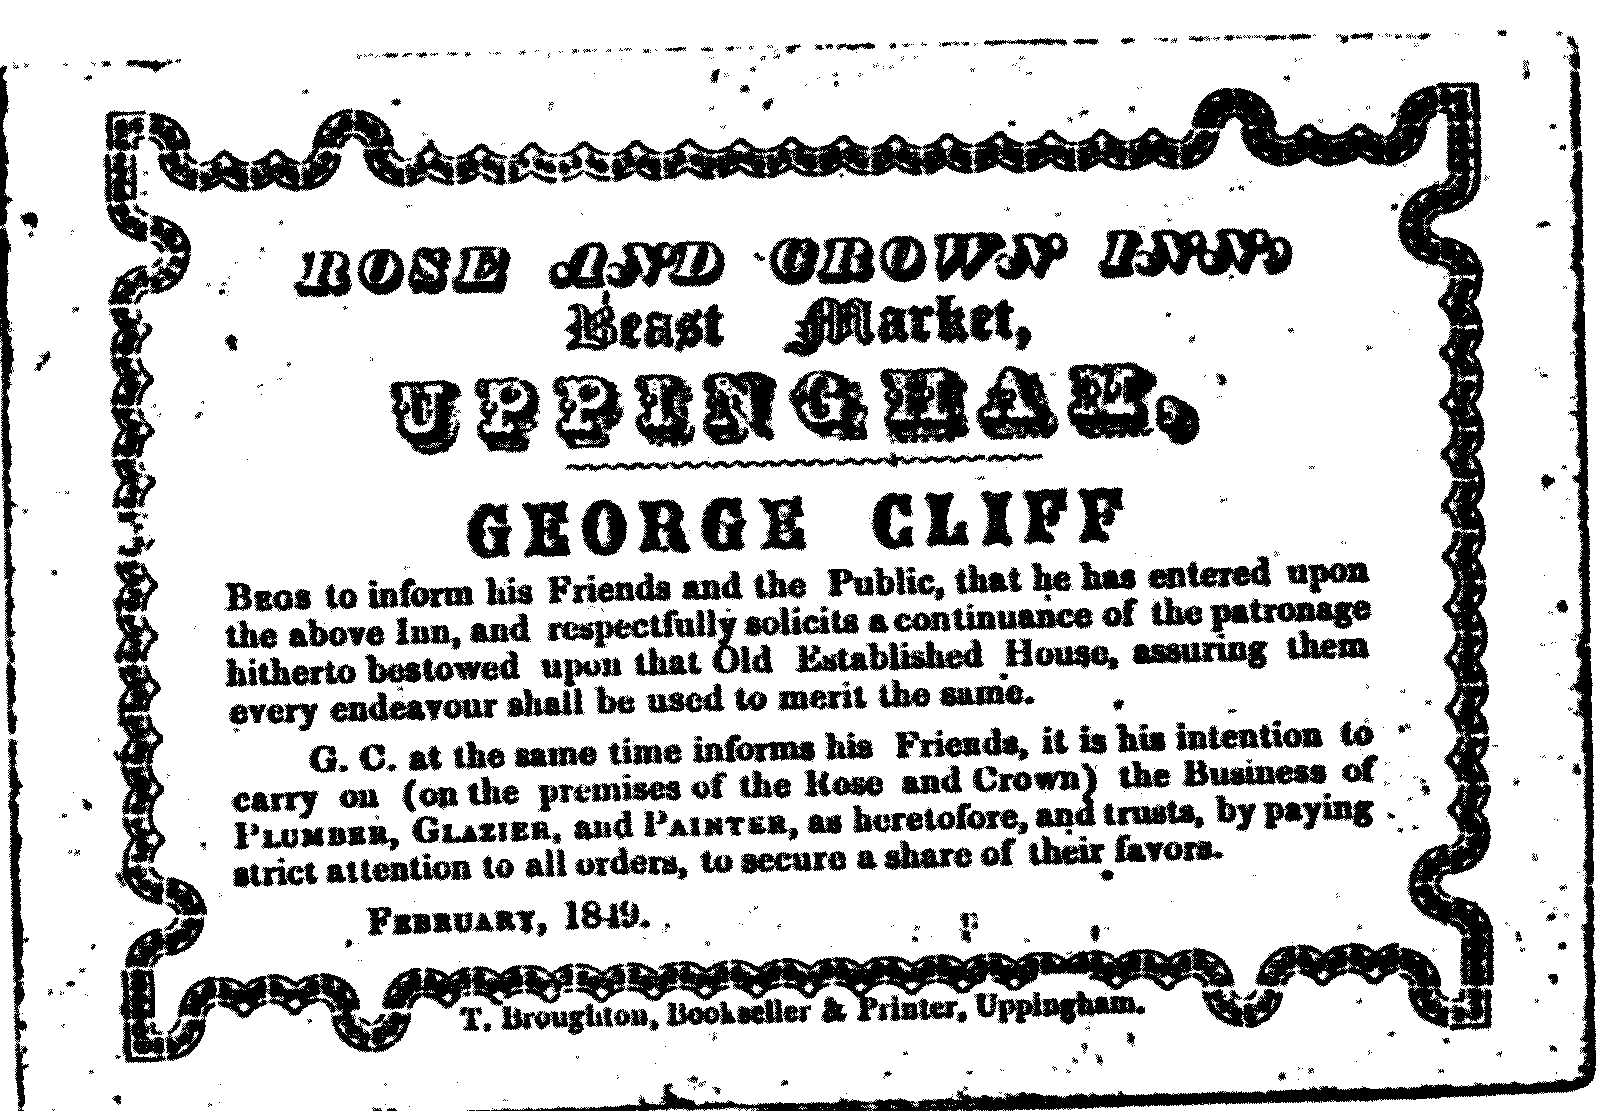 The advertisement dates from 1851.